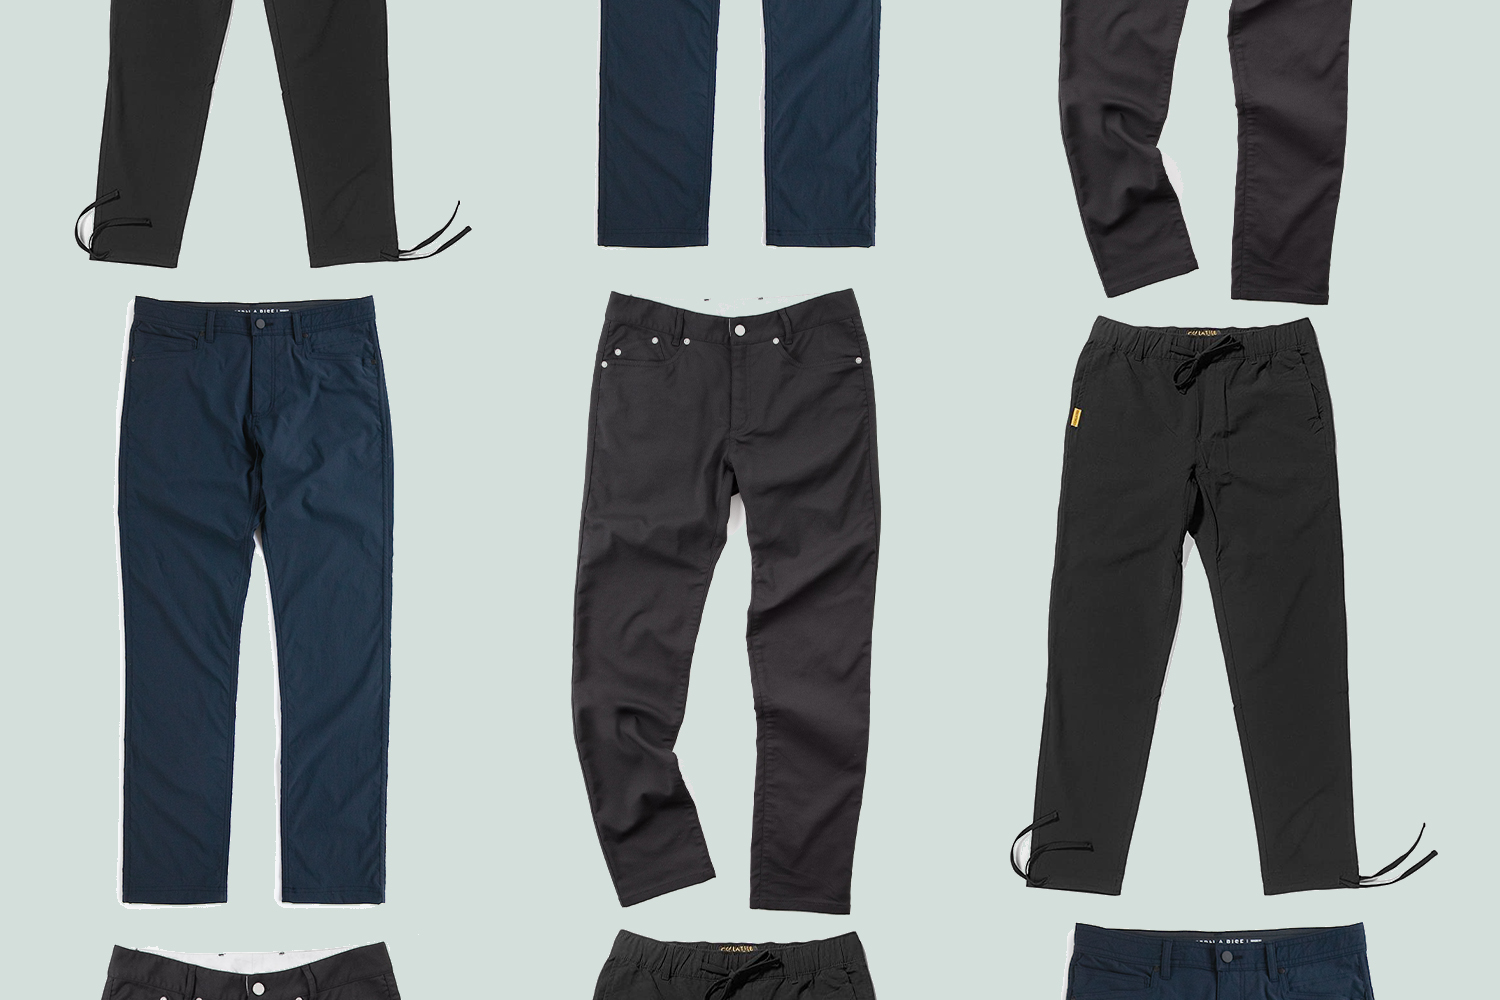 The Best Pairs of Technical Pants for Men - InsideHook